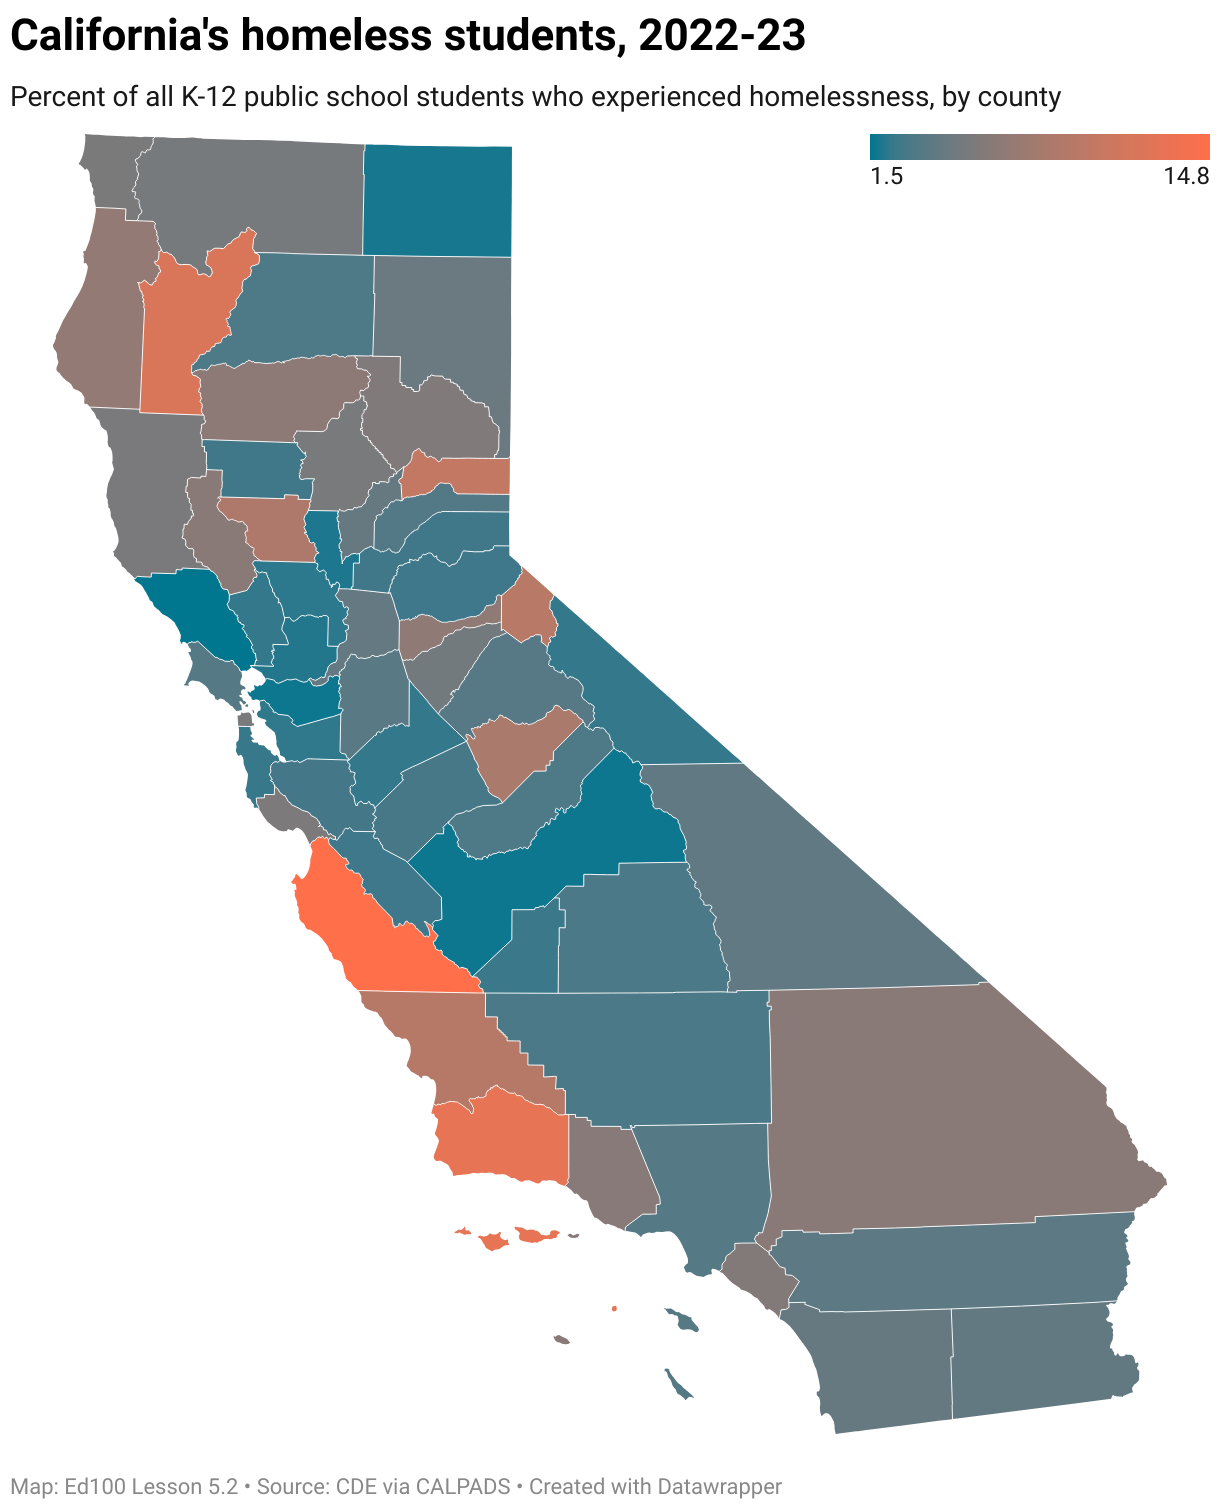 California's homeless K12 students, by county